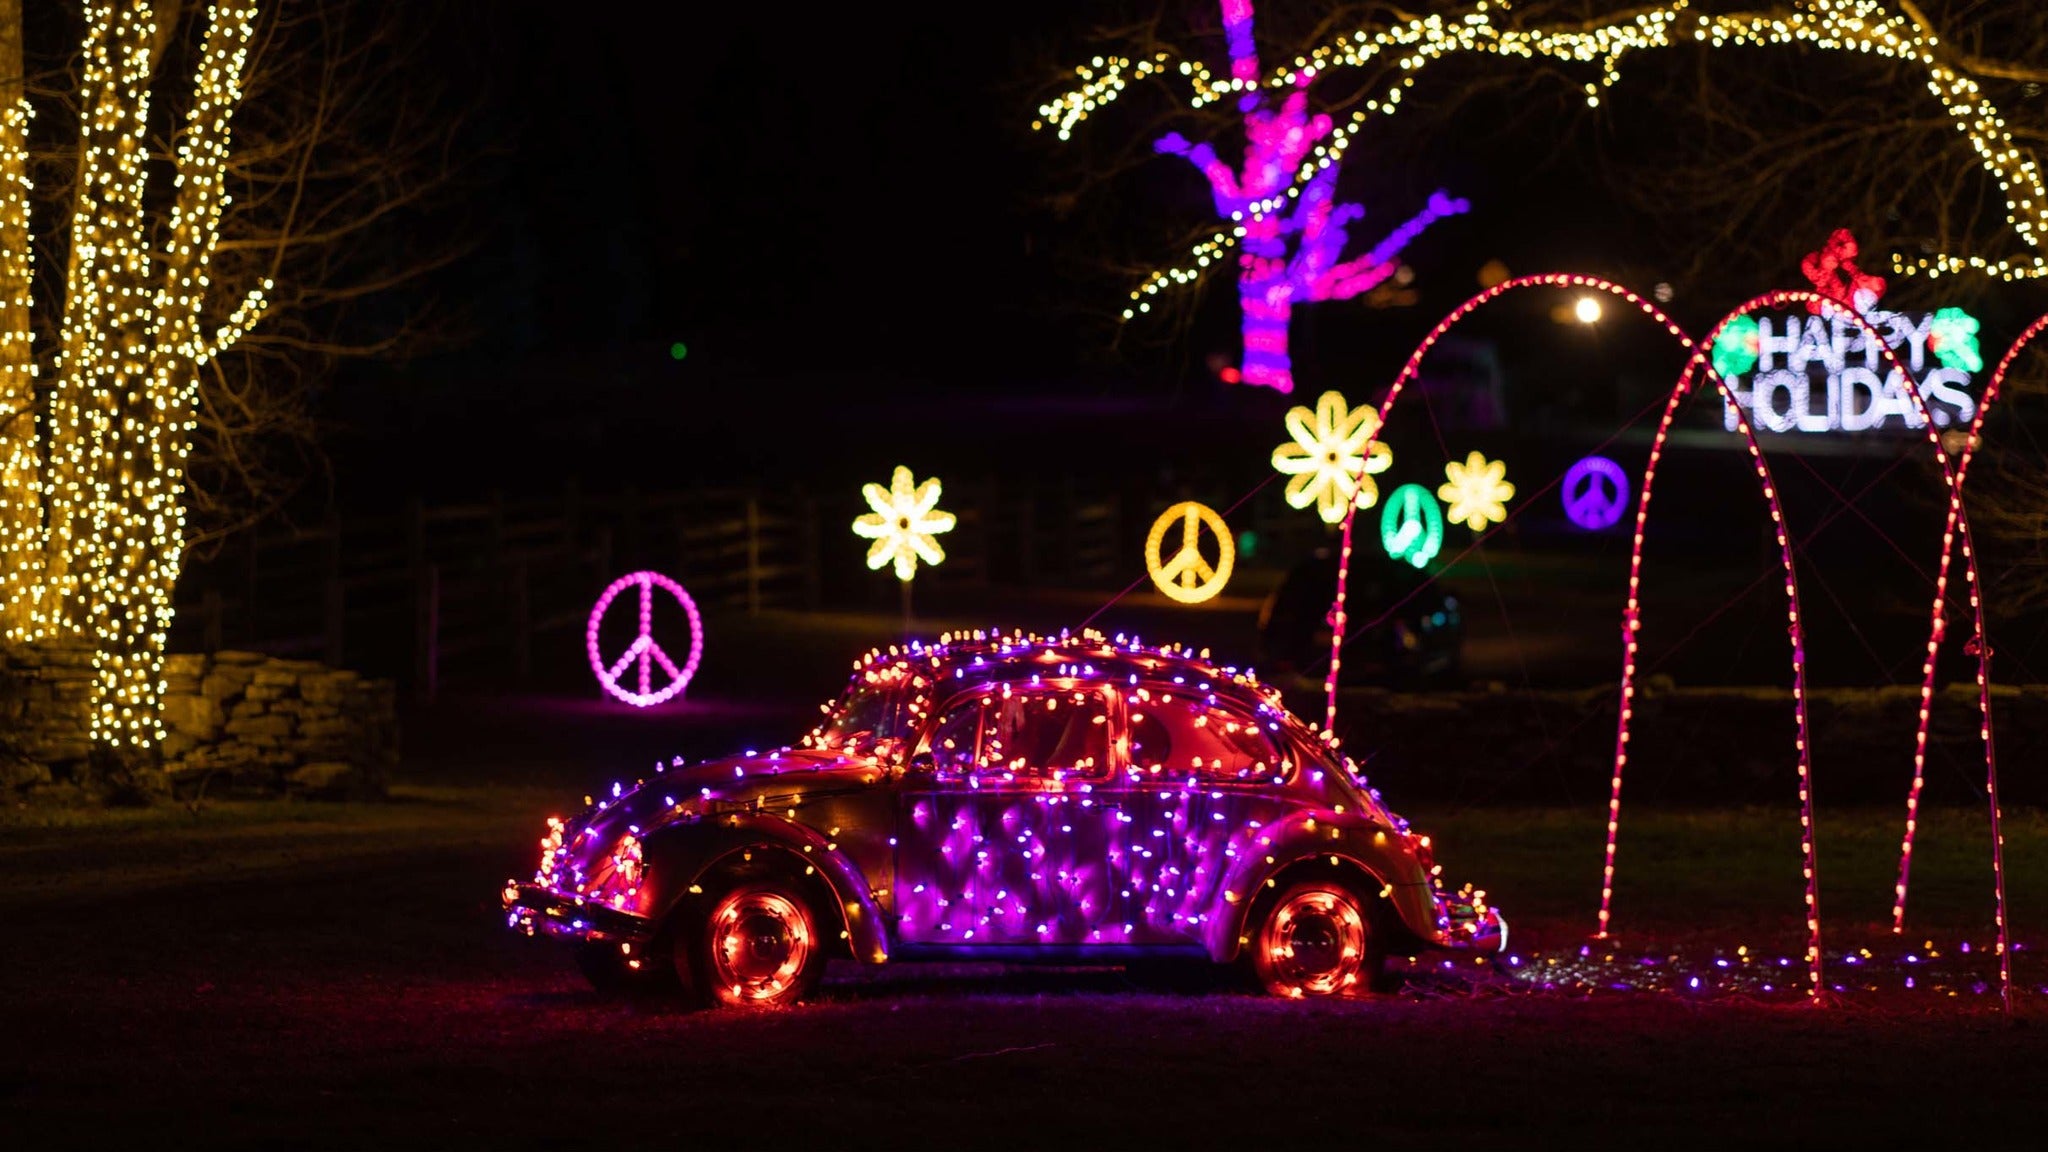 Peace, Love & Lights powered by Healey Brothers in Bethel promo photo for Early Bird Pricing presale offer code